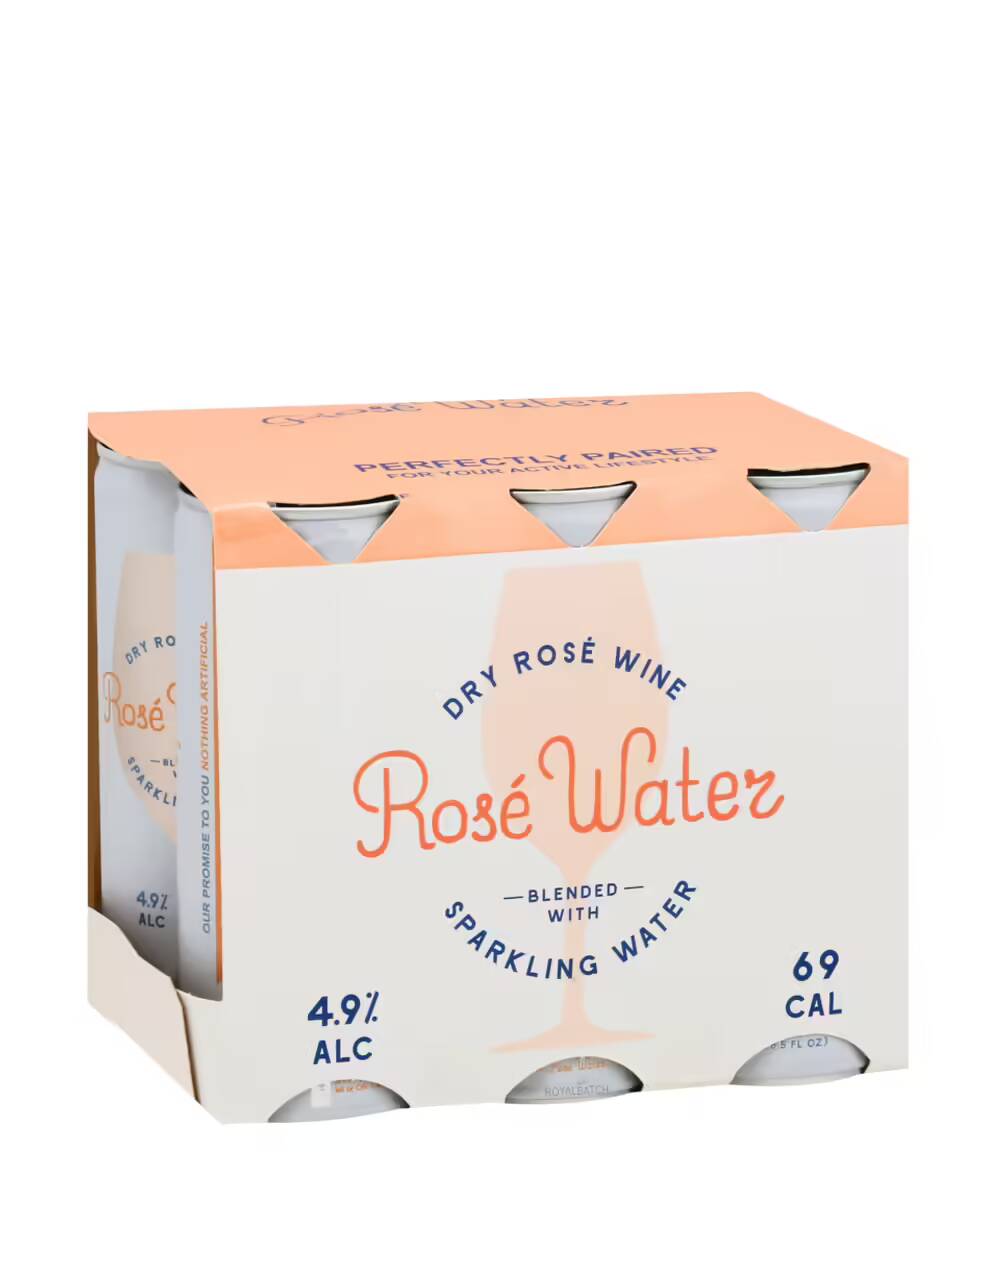 Rose Water Dry Rose Wine Sparkling Water (6 Pack) 250ml